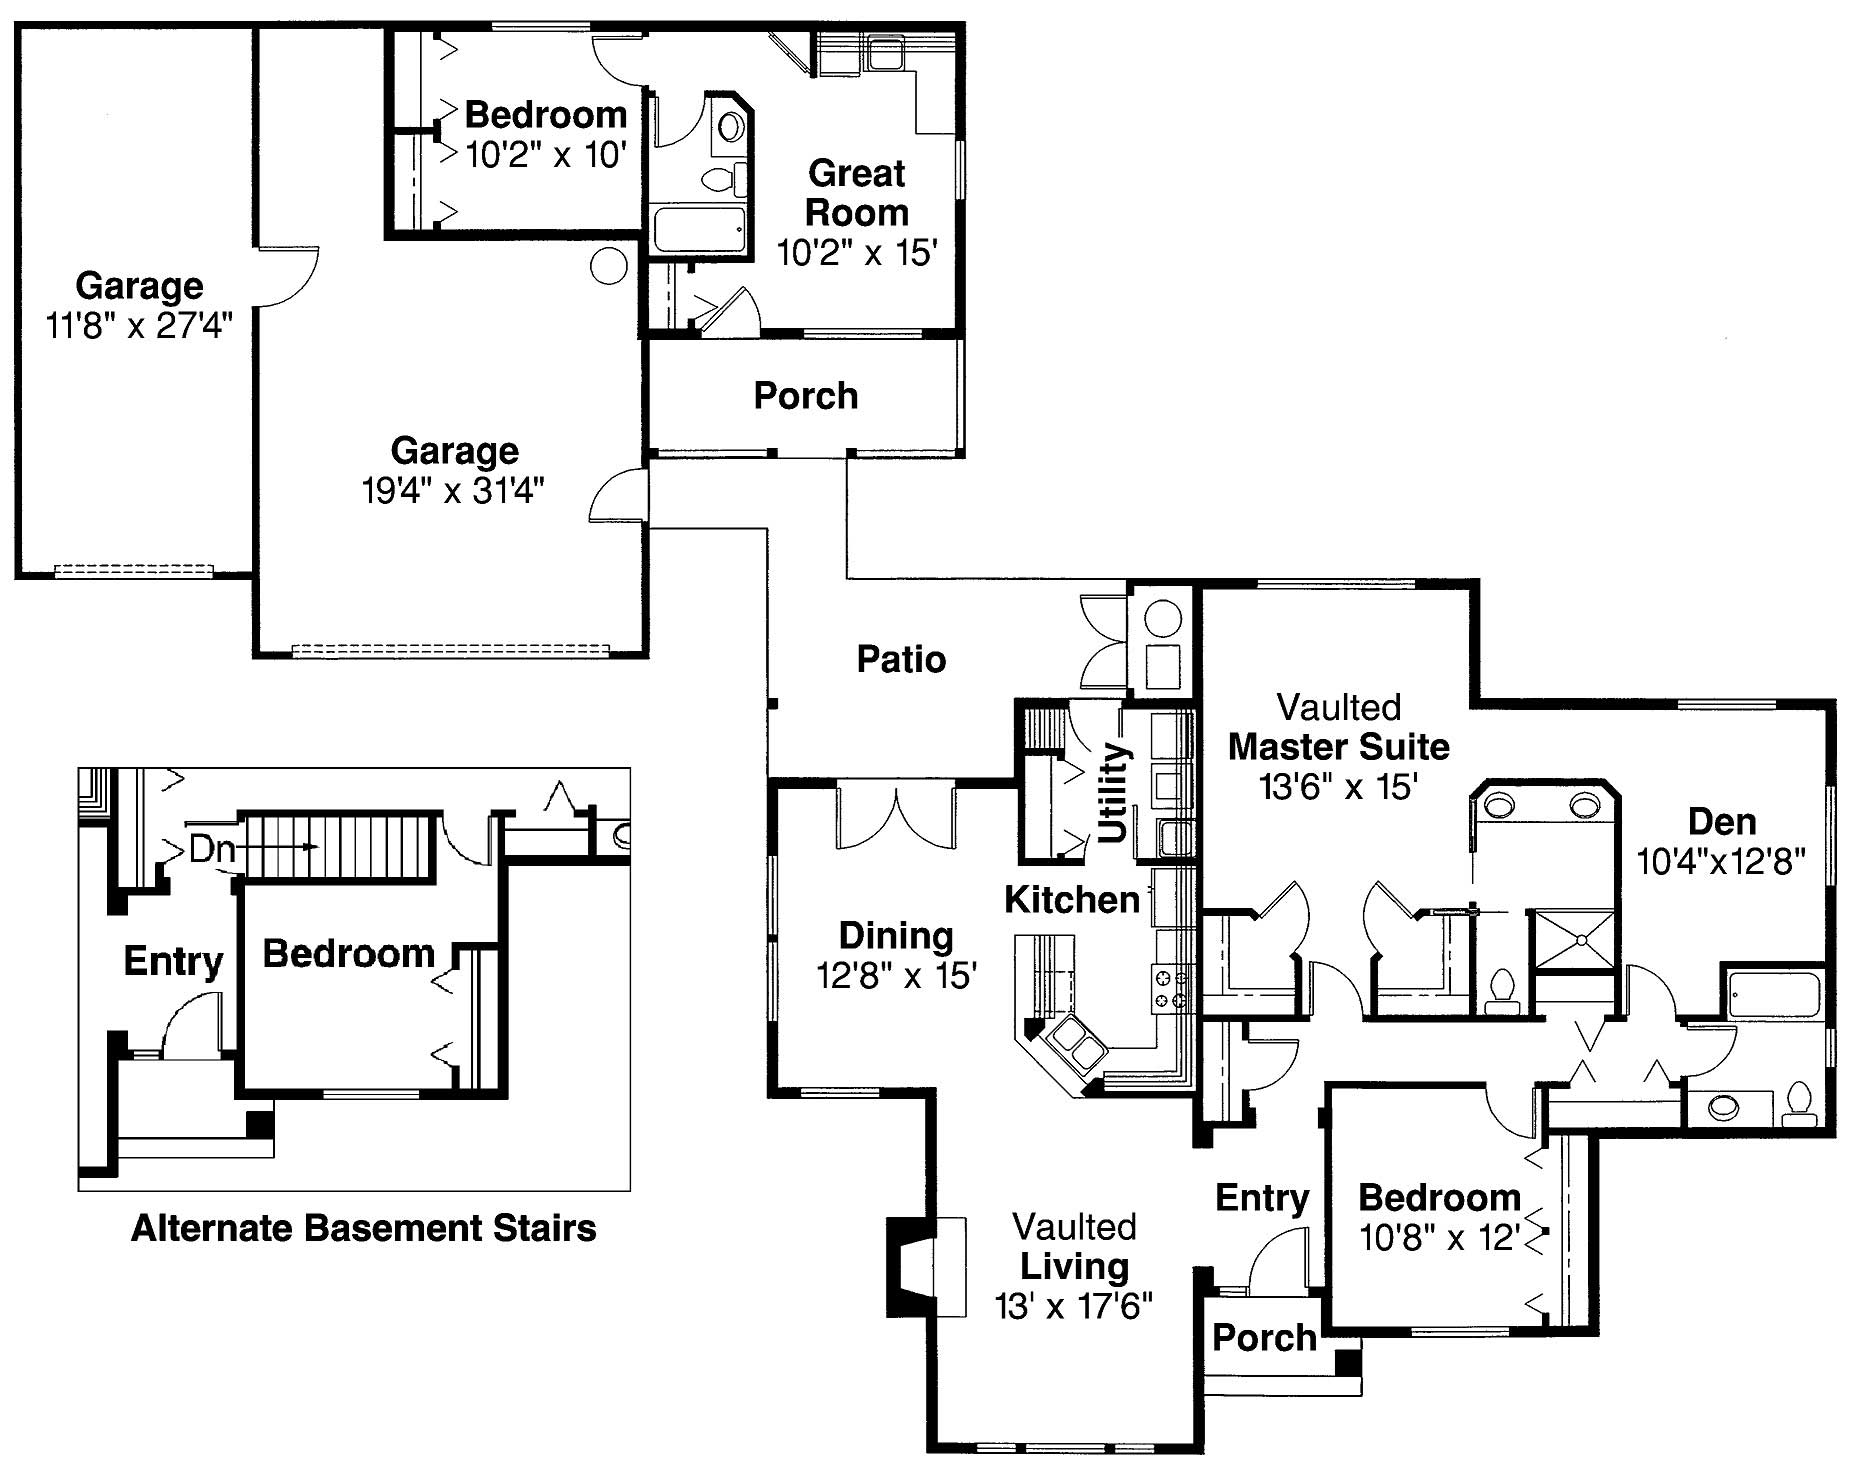 Transitional Home with 3 Bdrms, 2056 Sq Ft Floor Plan